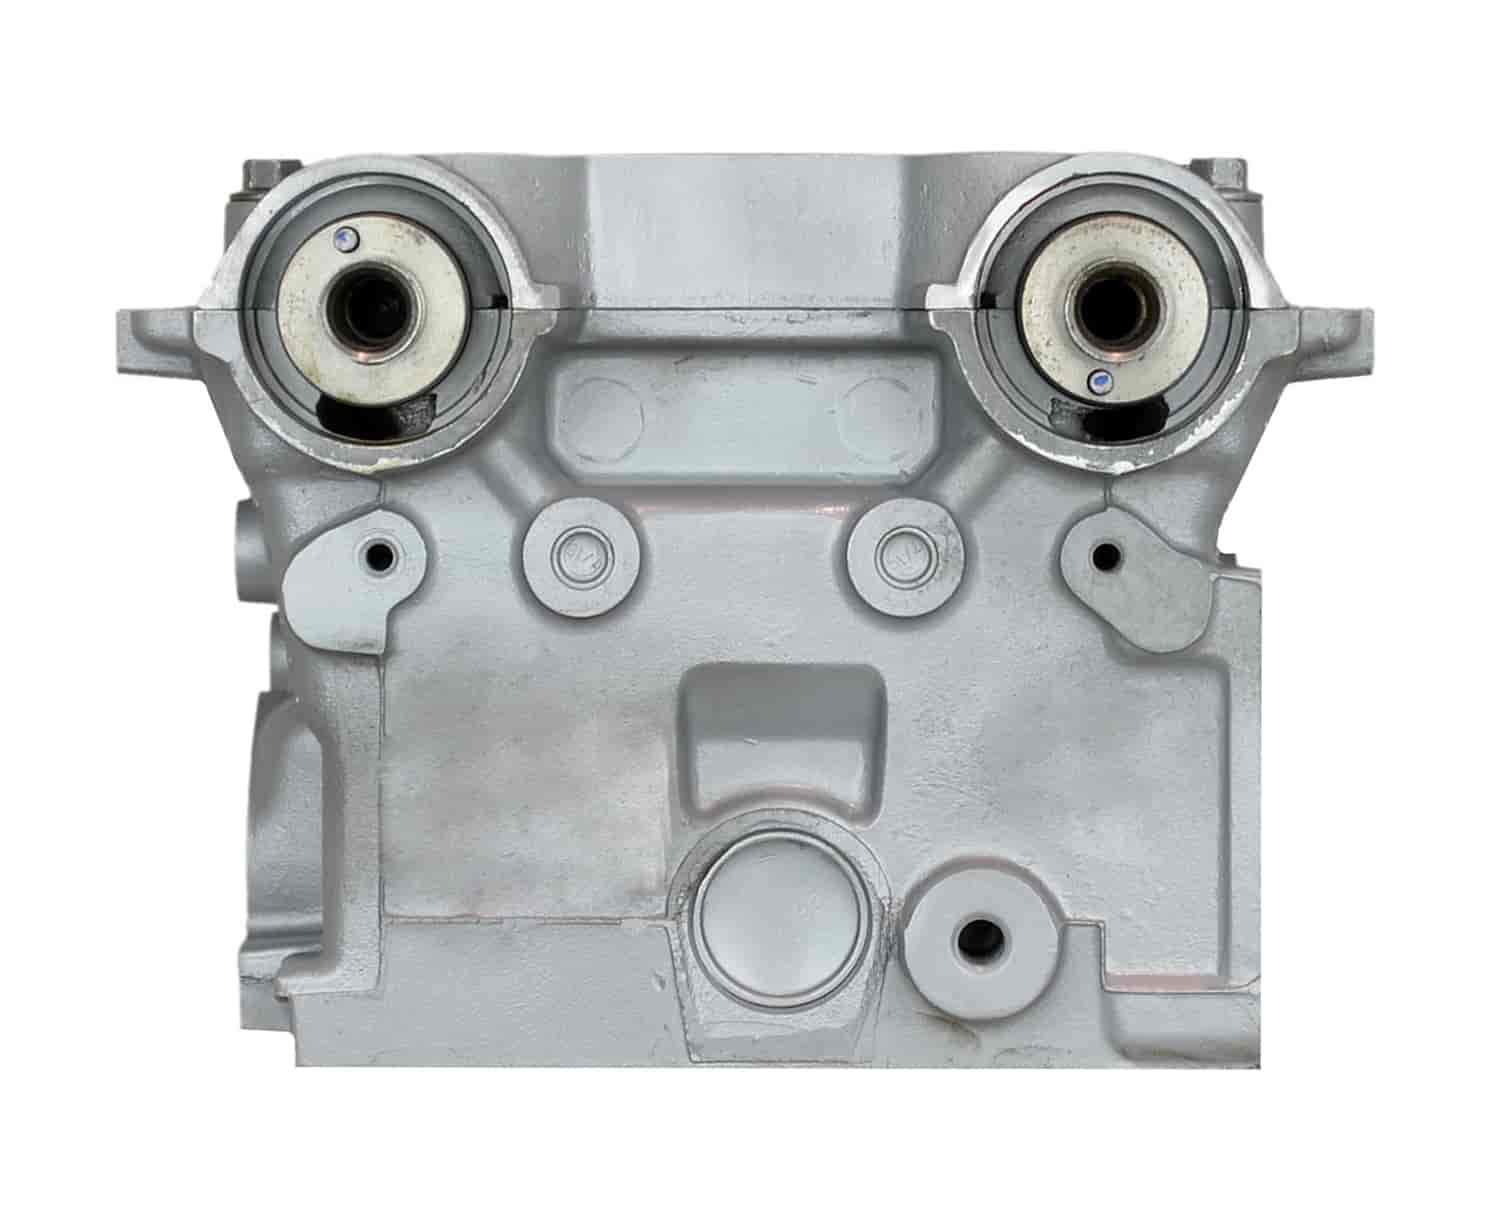 Remanufactured Cylinder Head for 1995-1999 Dodge/Plymouth with 2.0L L4